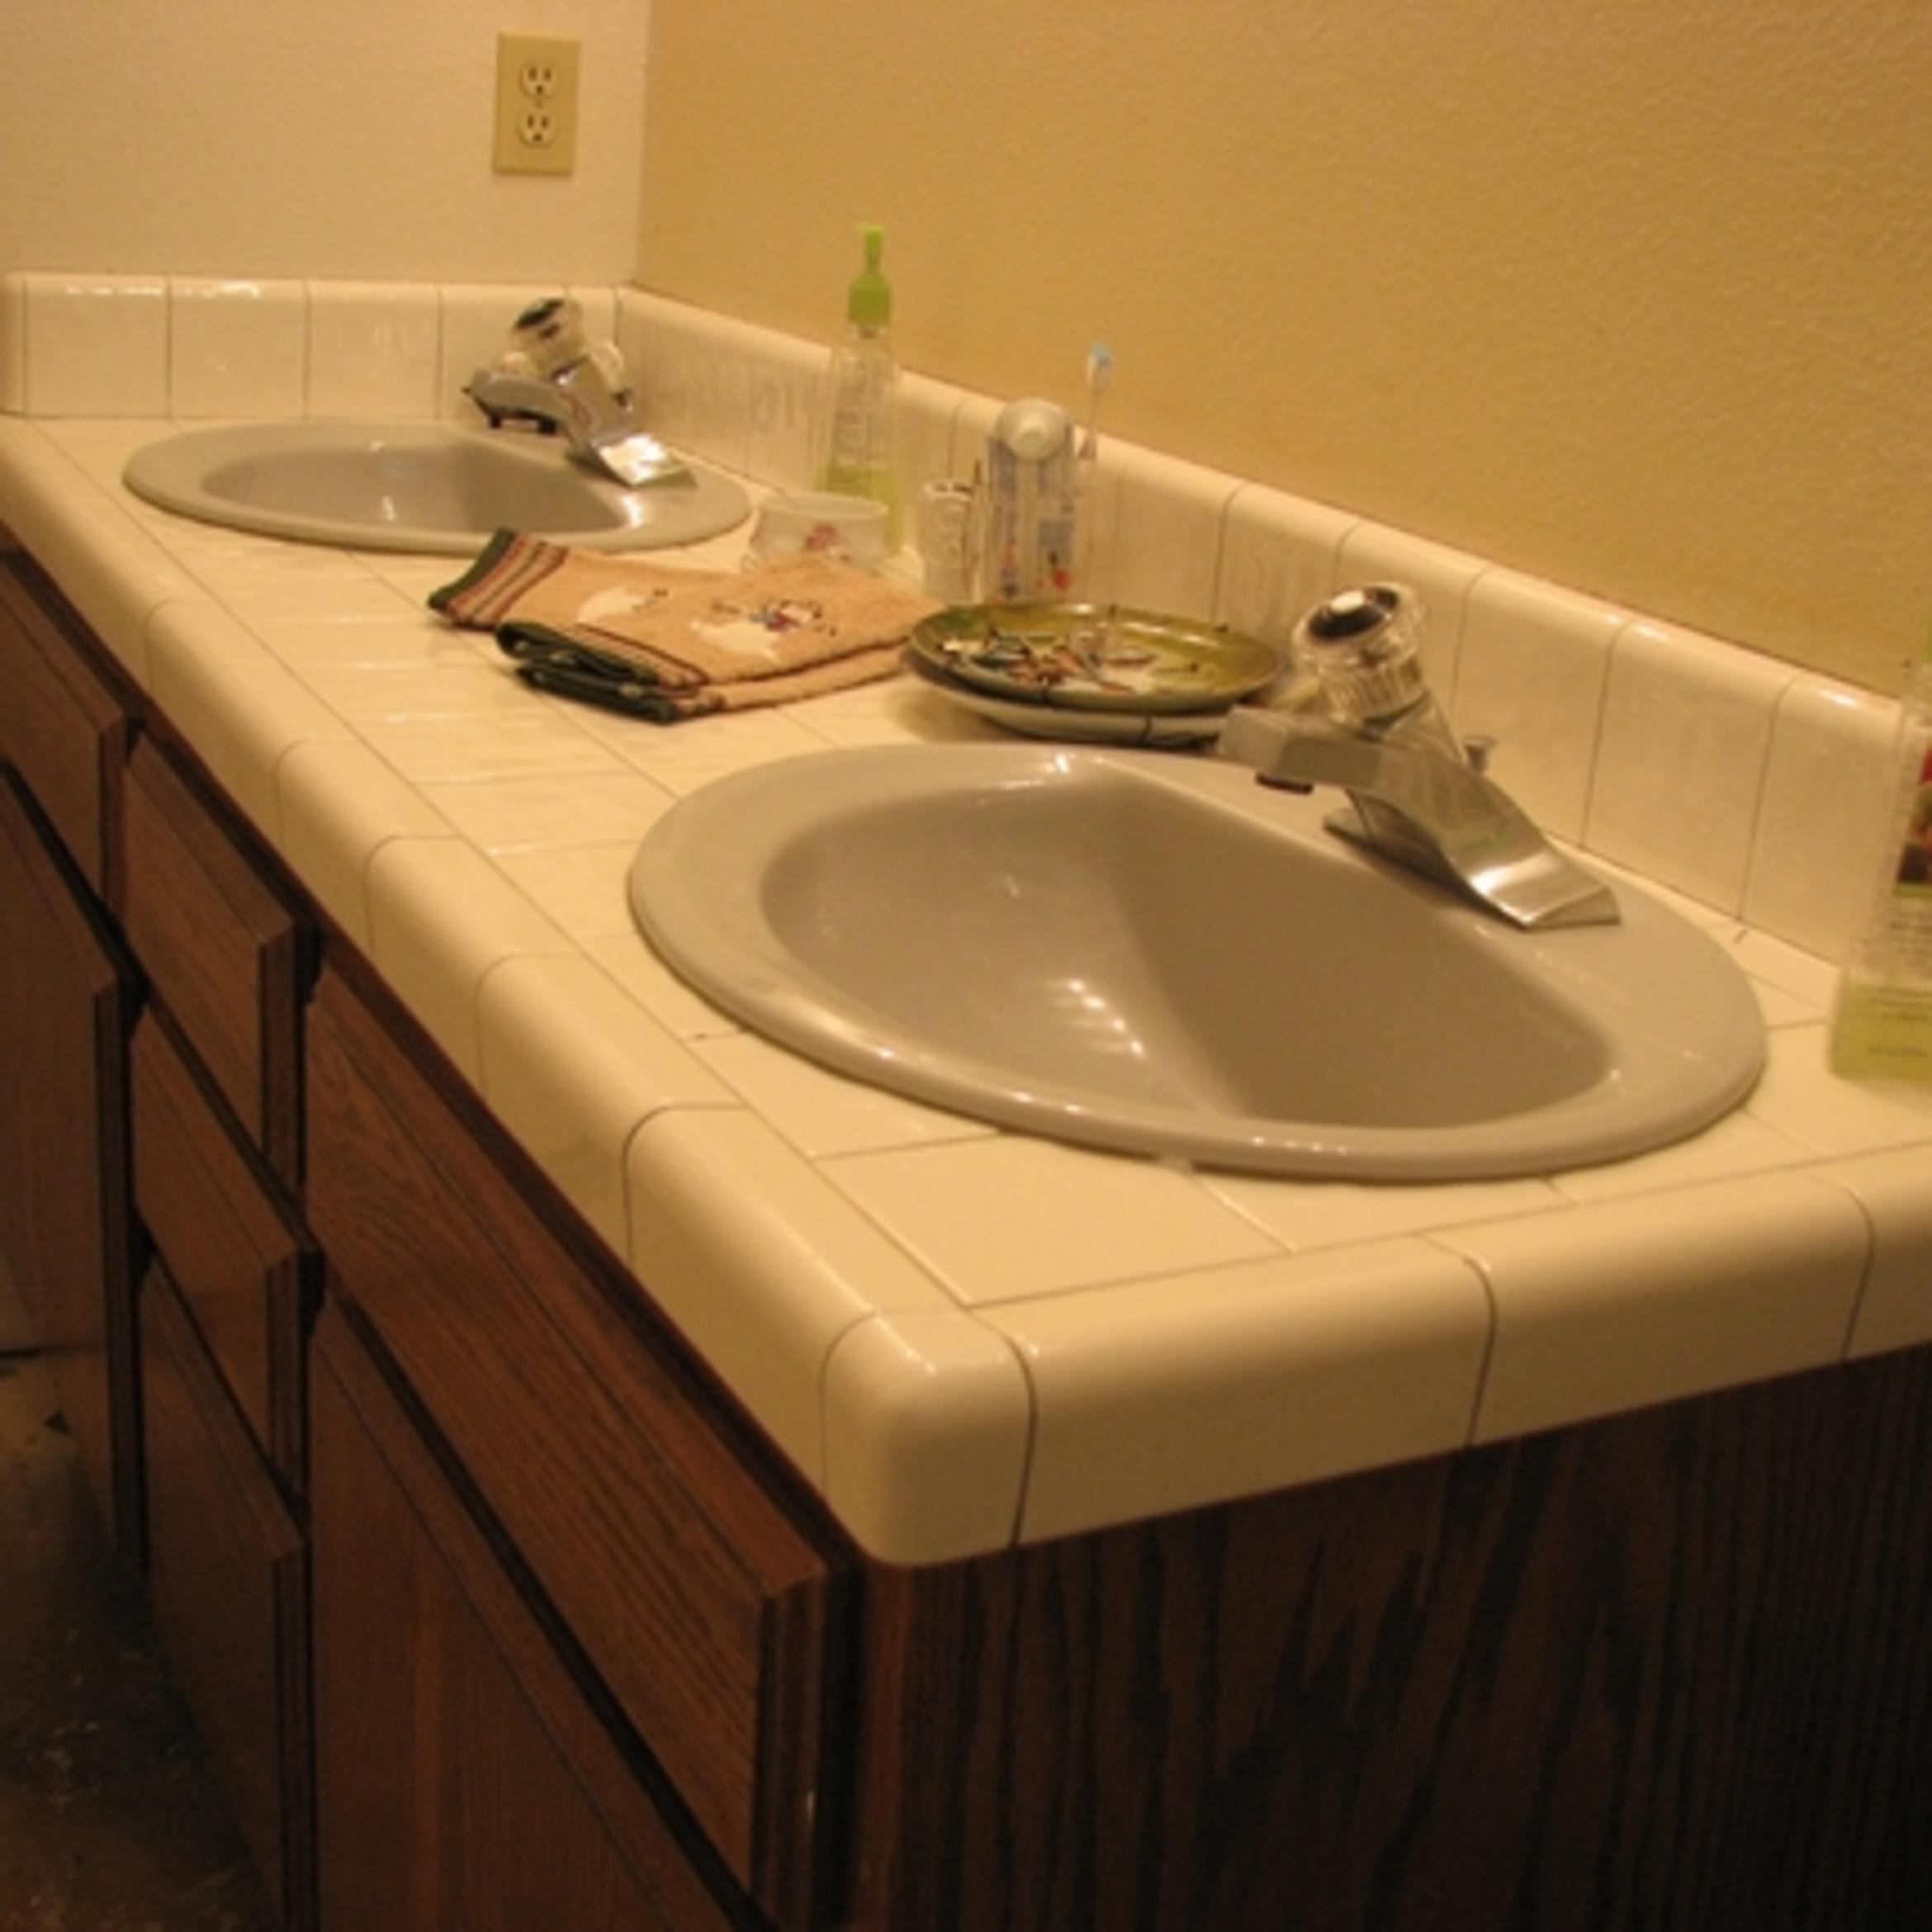 The sink before